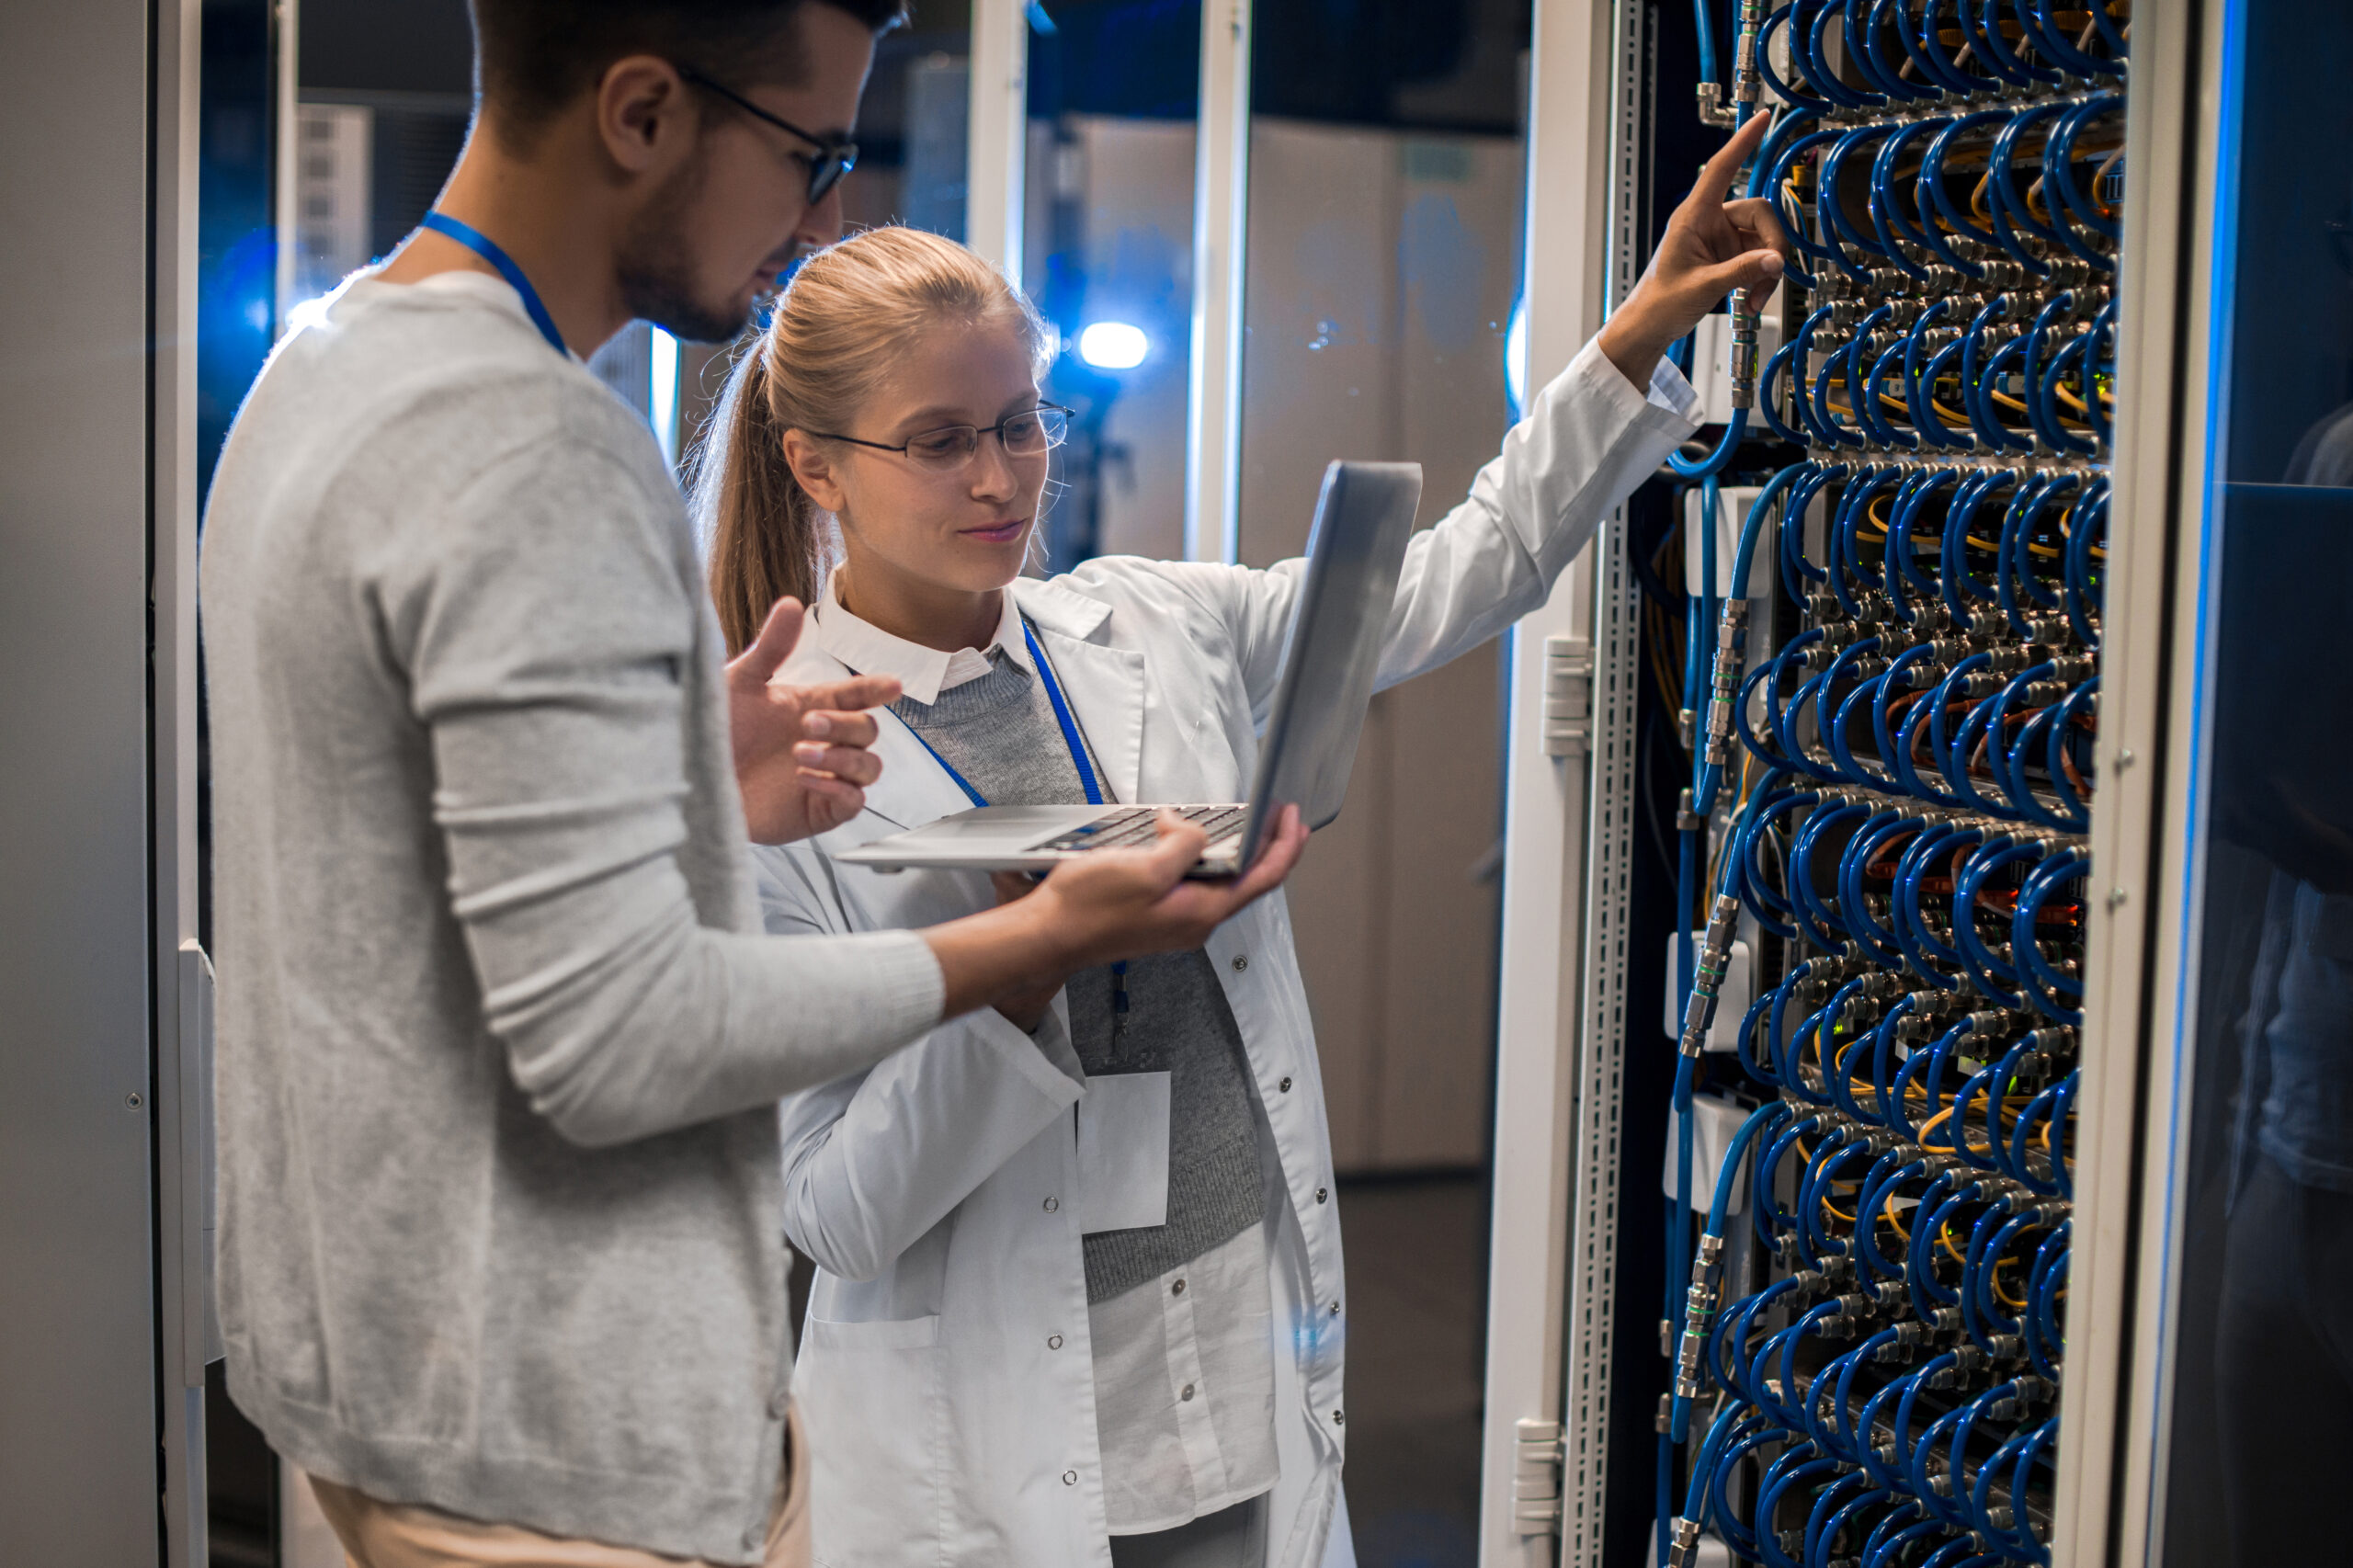 Portrait of young man and woman standing by server cabinets and discussing data while working with supercomputer in IT center